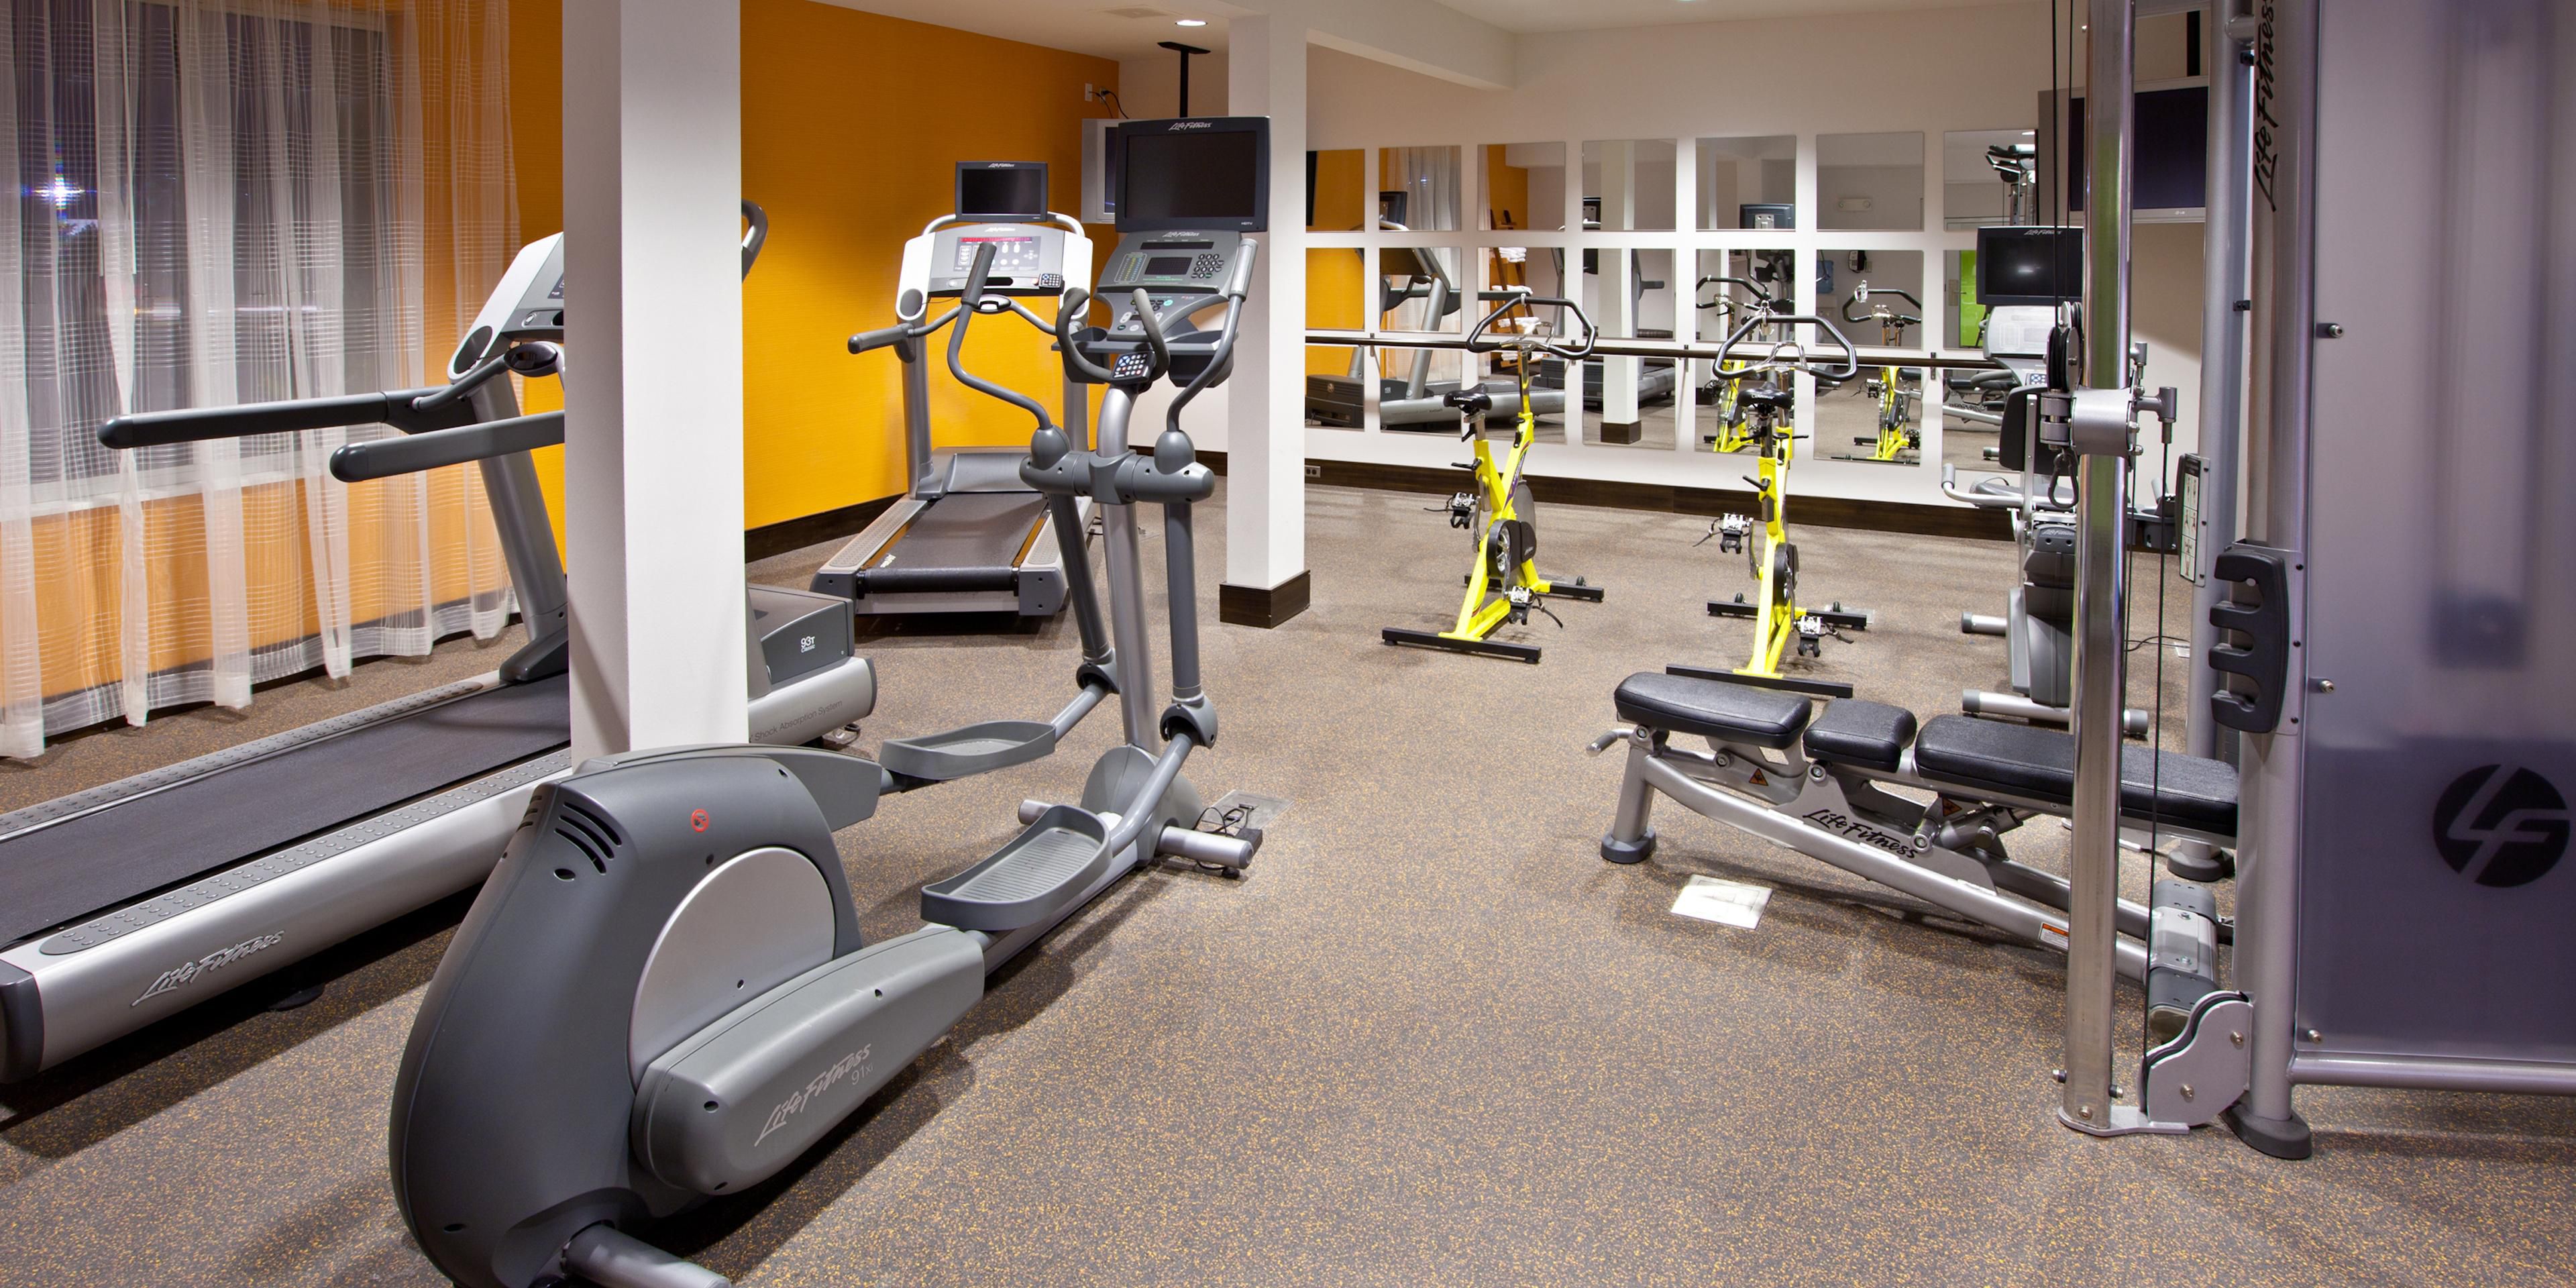 Why let your travel plans stop your fitness plans? We make it easy to conquer both in our 24/7 onsite fitness center.